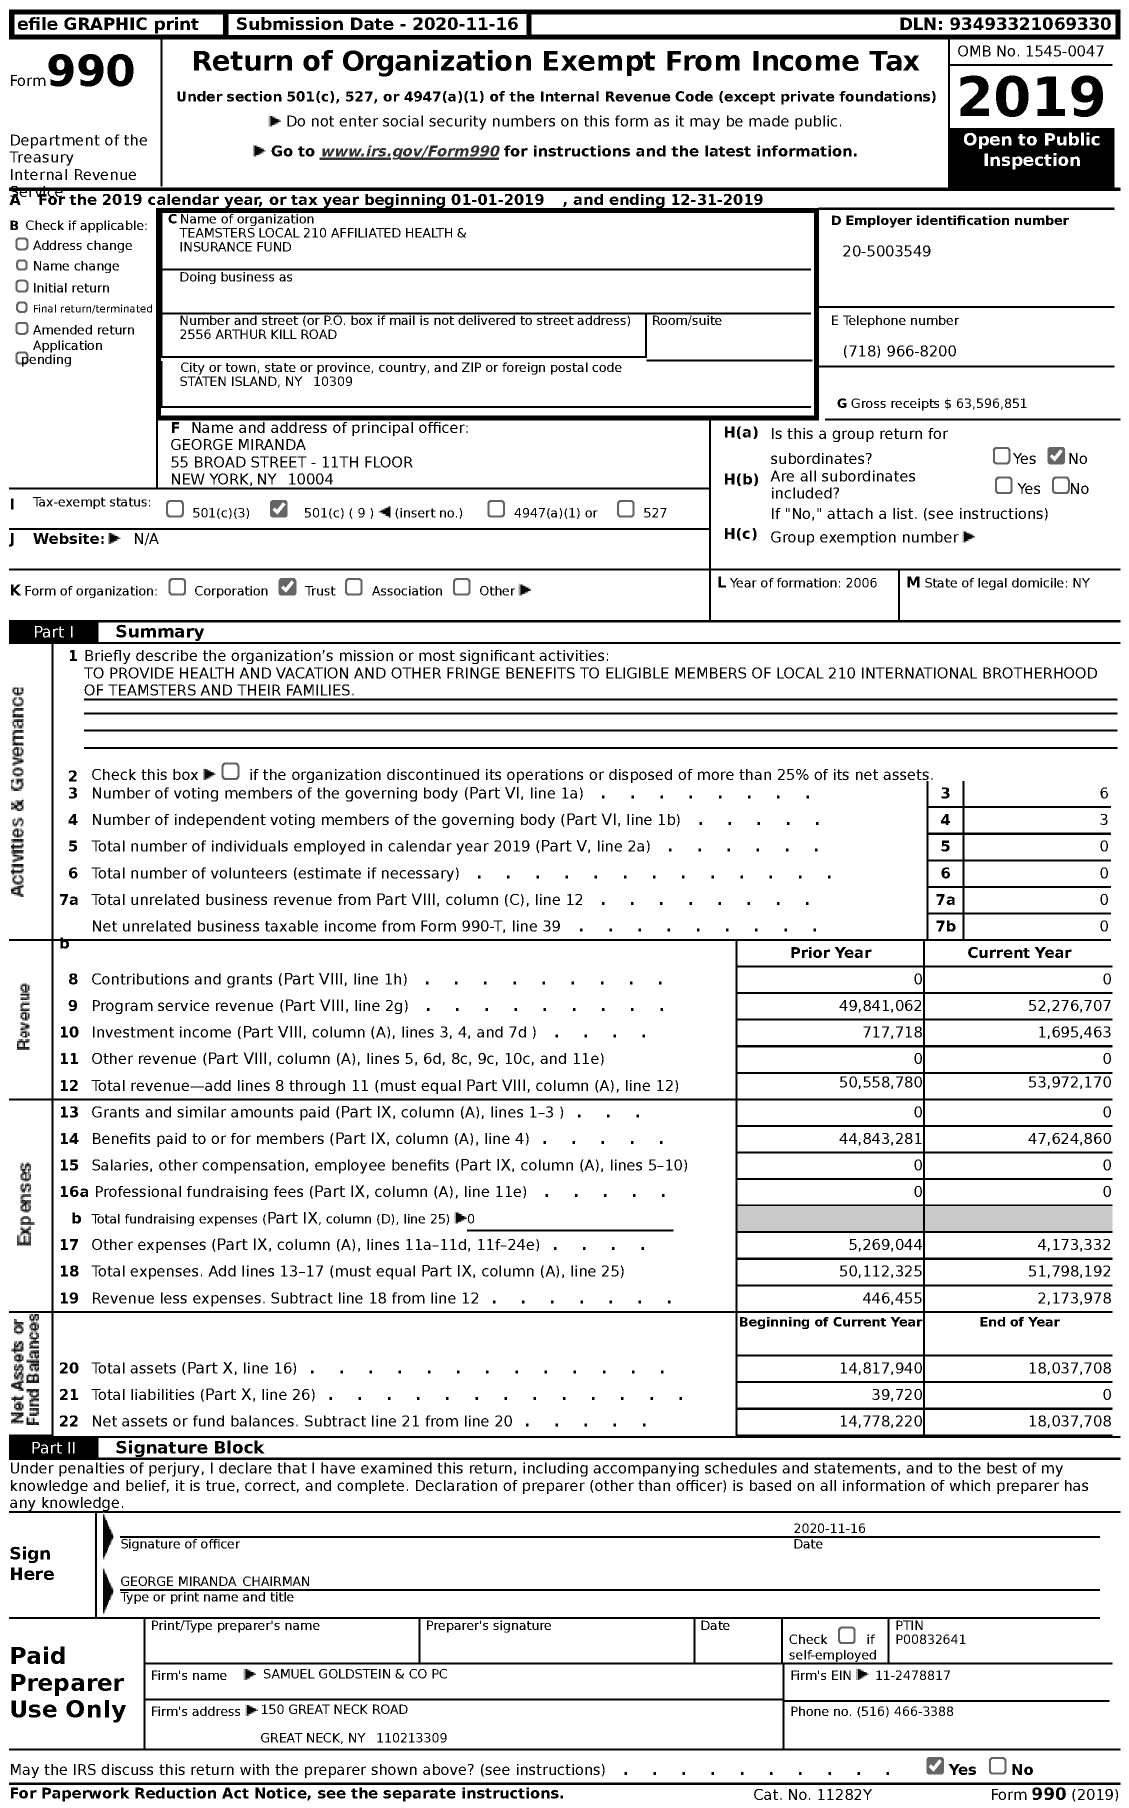 Image of first page of 2019 Form 990 for Teamsters Local 210 Affiliated Health and Insurance Fund